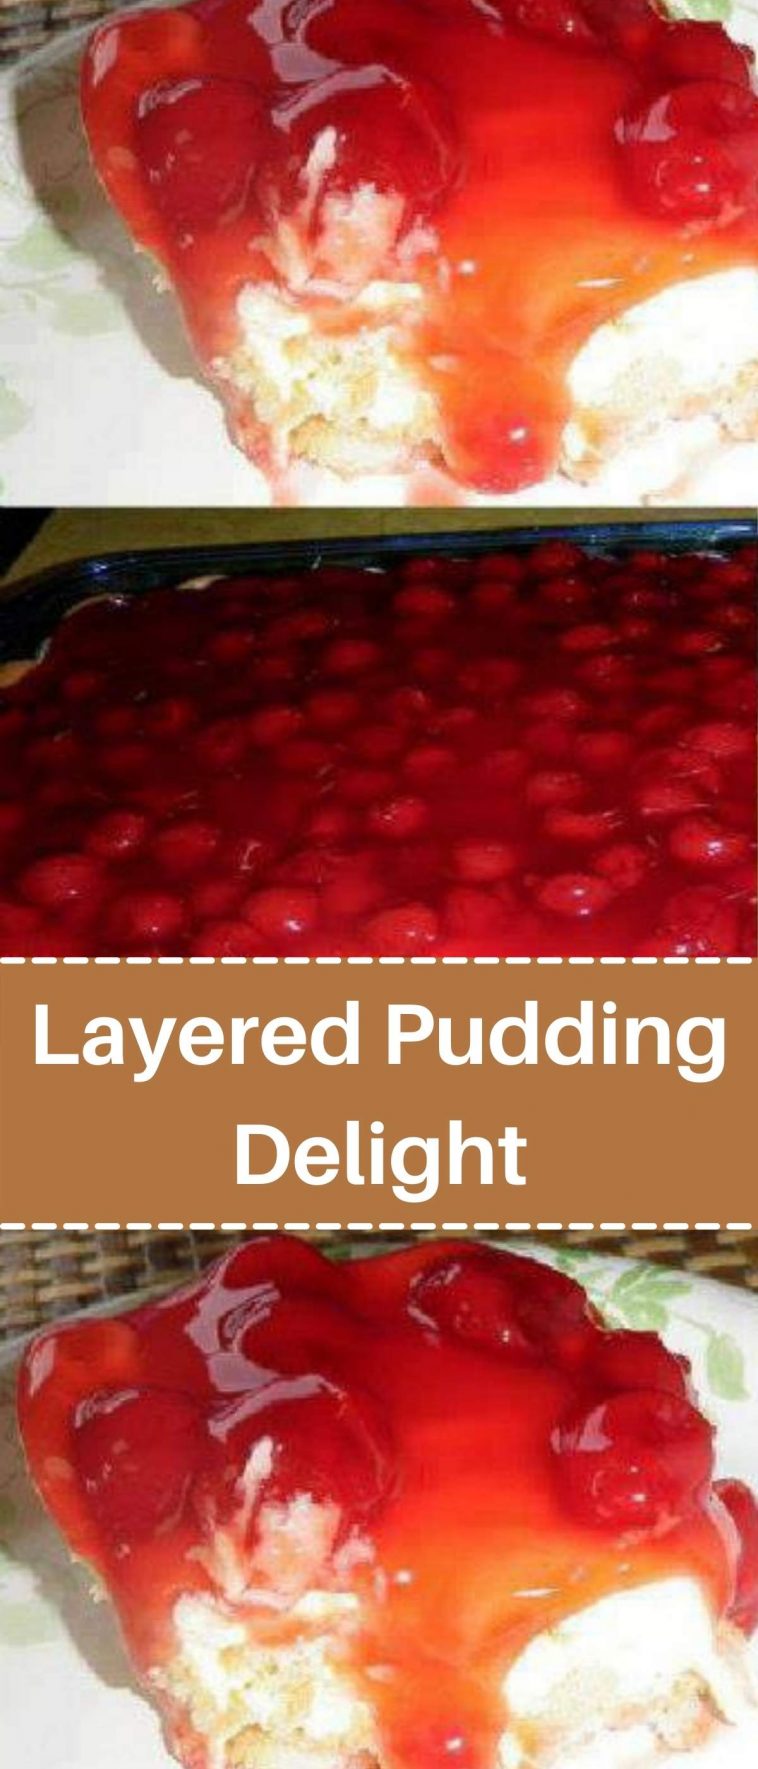 Layered Pudding Delight